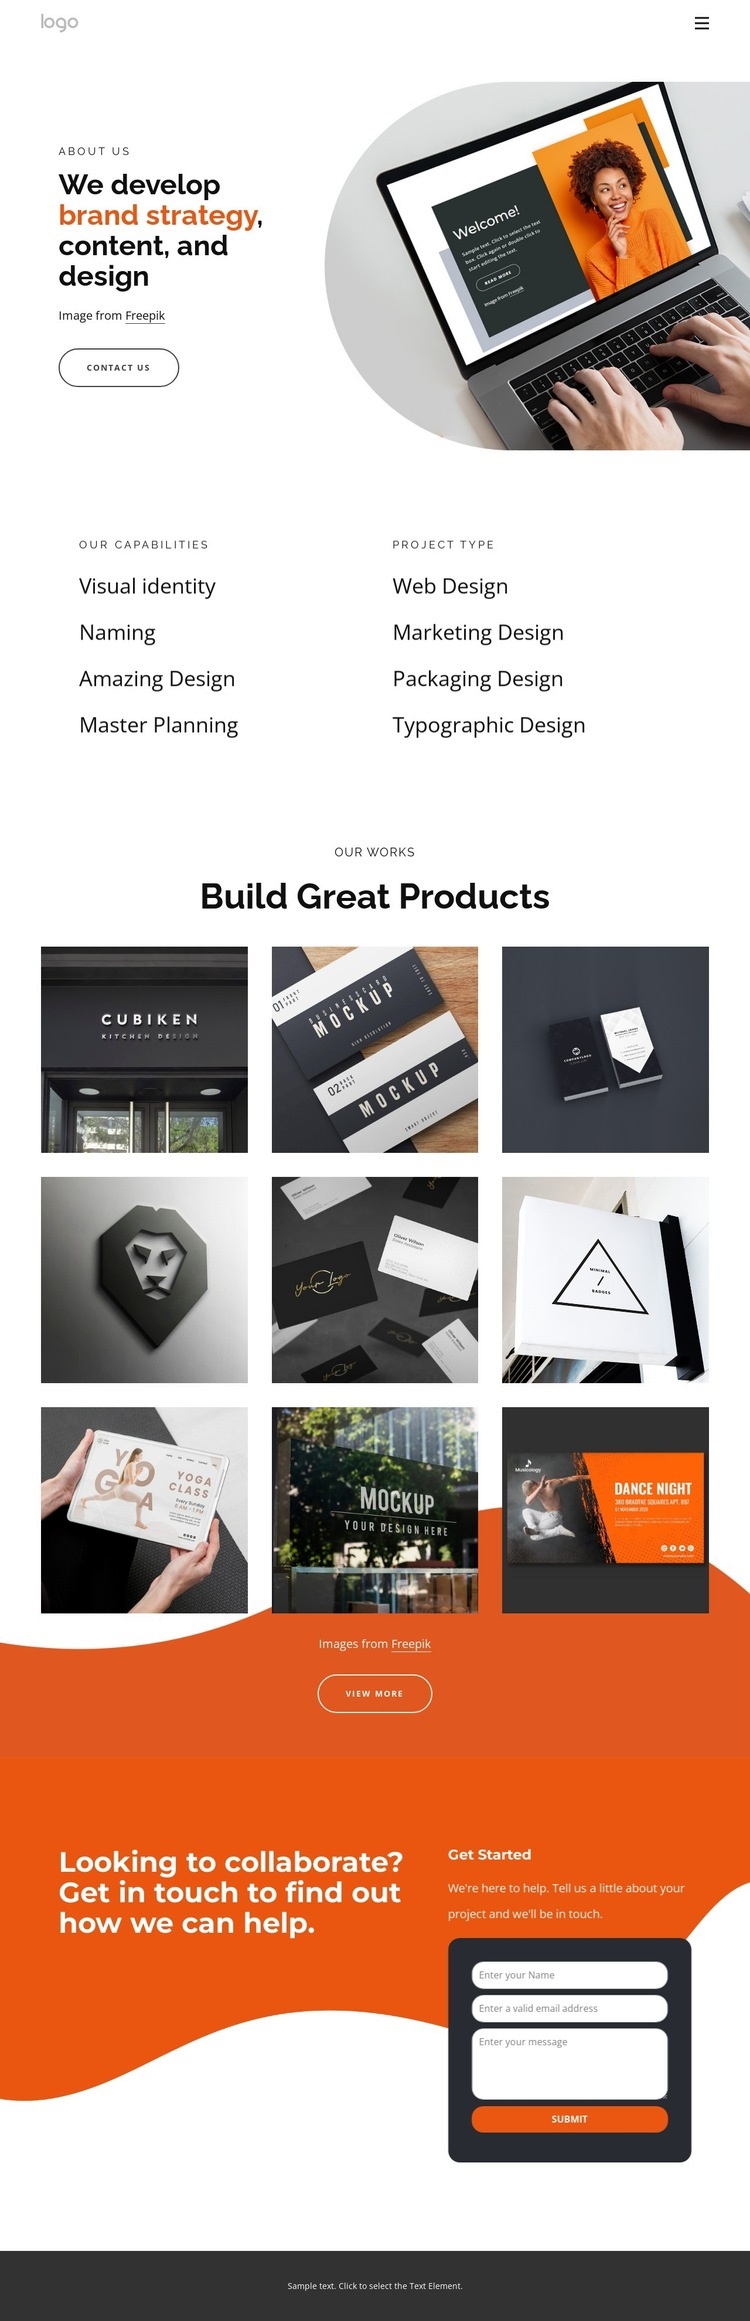 We create thoughtful experiences for humans Webflow Template Alternative